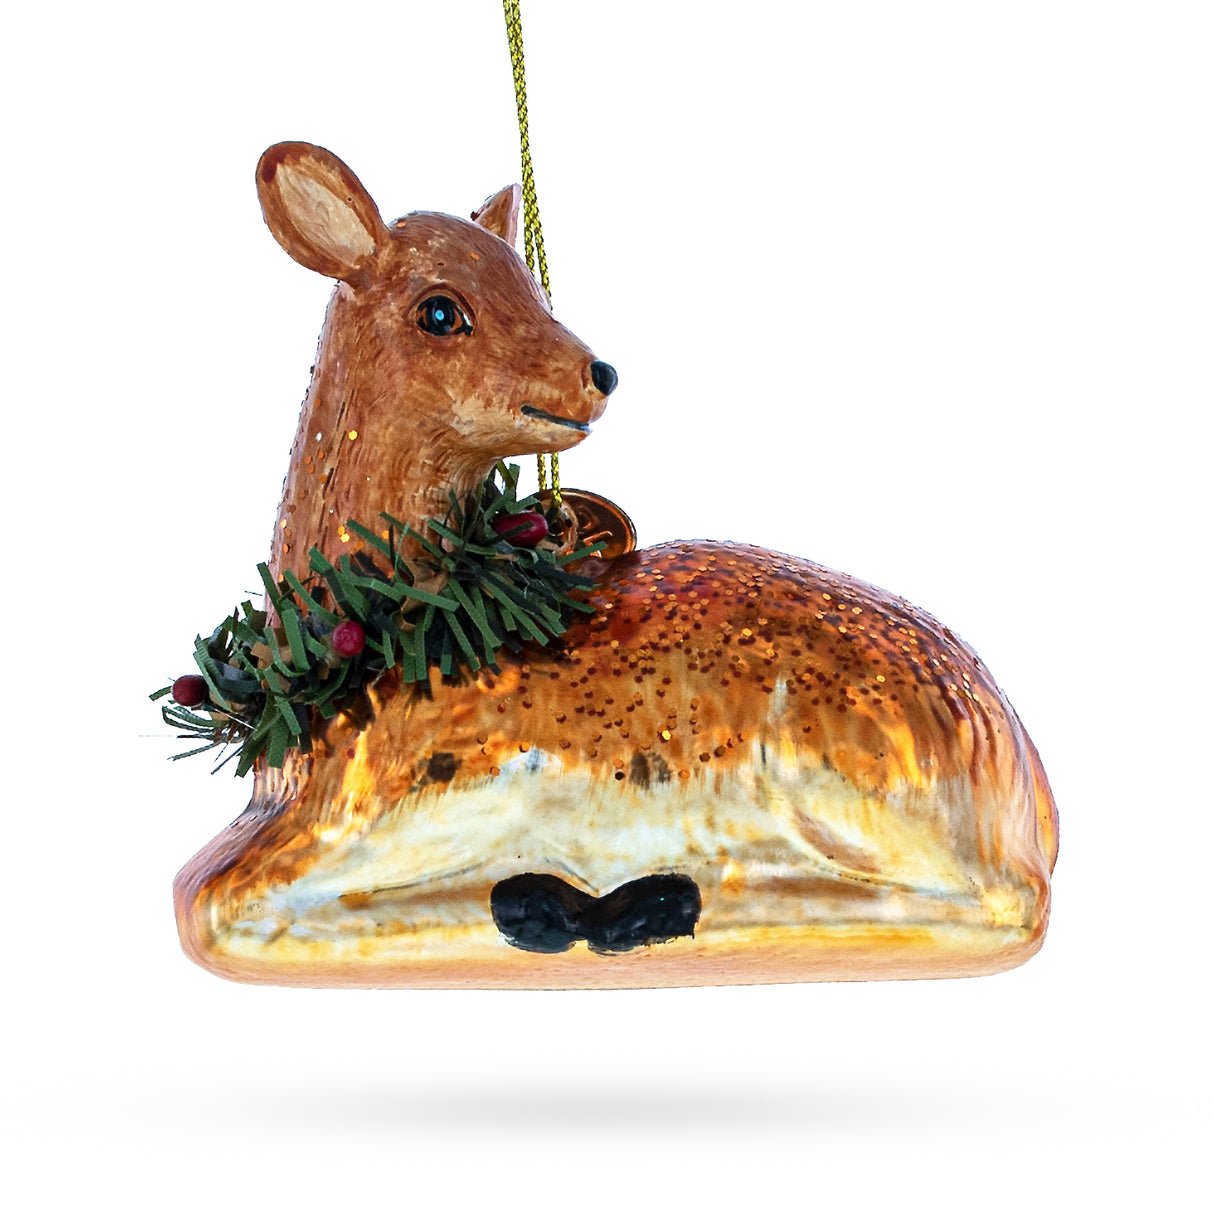 Glass Graceful Deer Adorned with Christmas Wreath - Magnificent Blown Glass Christmas Ornament in Brown color